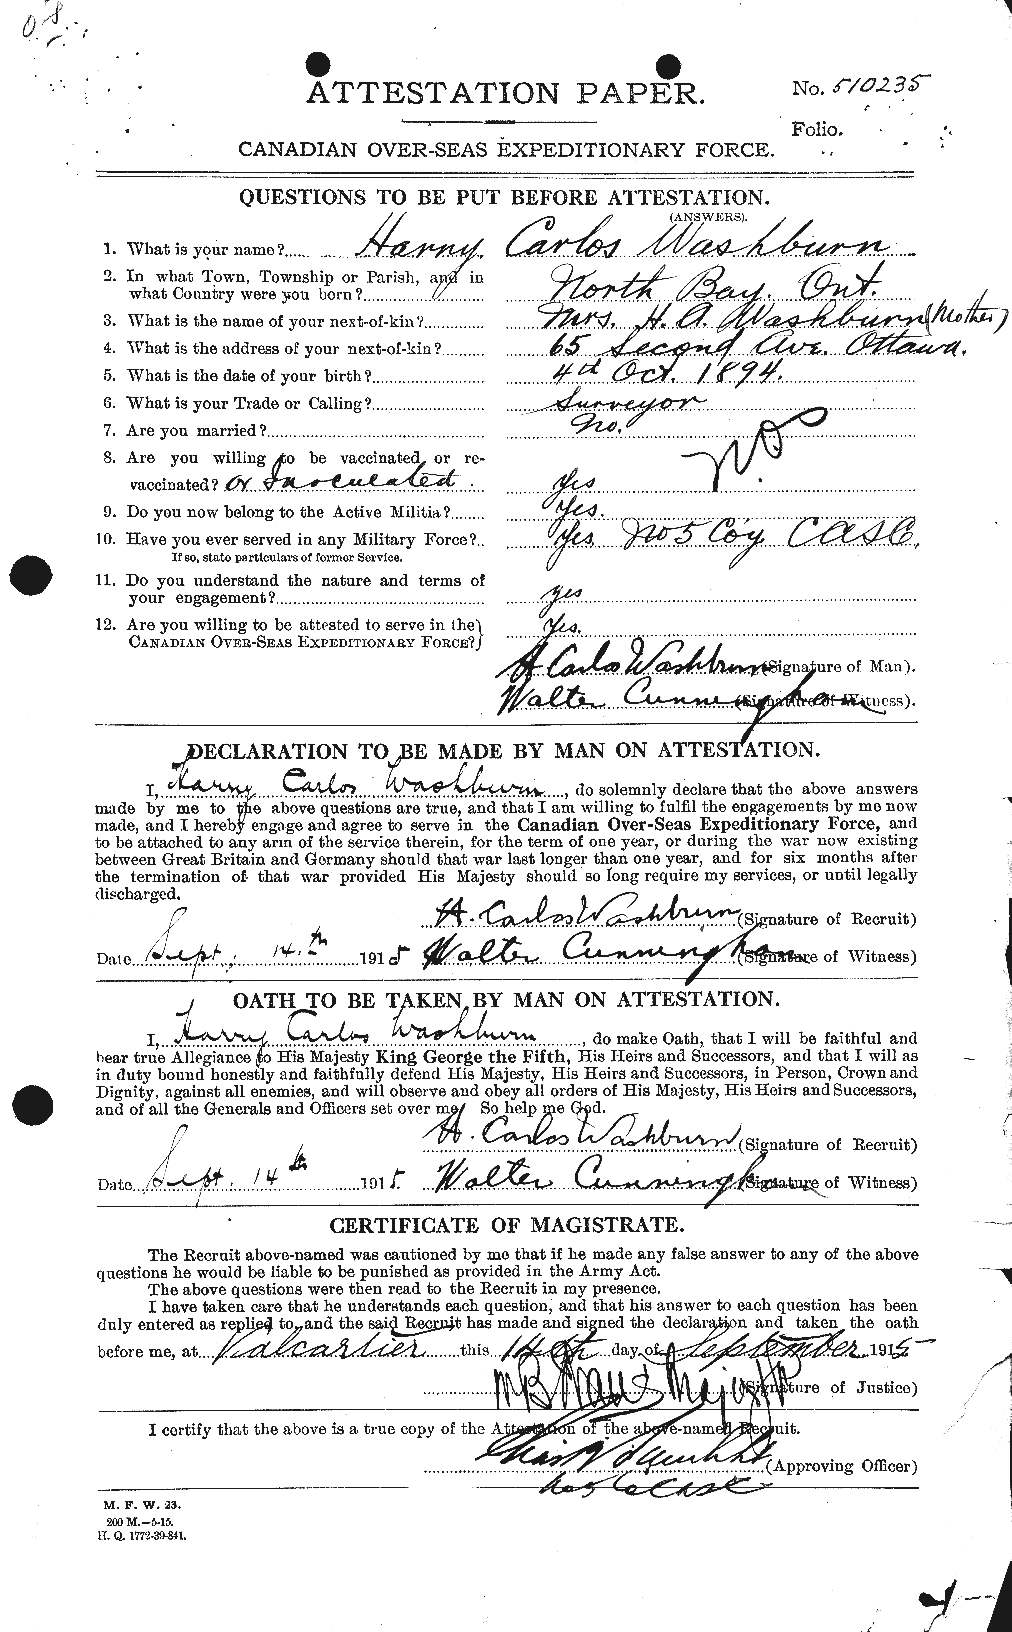 Personnel Records of the First World War - CEF 657066a